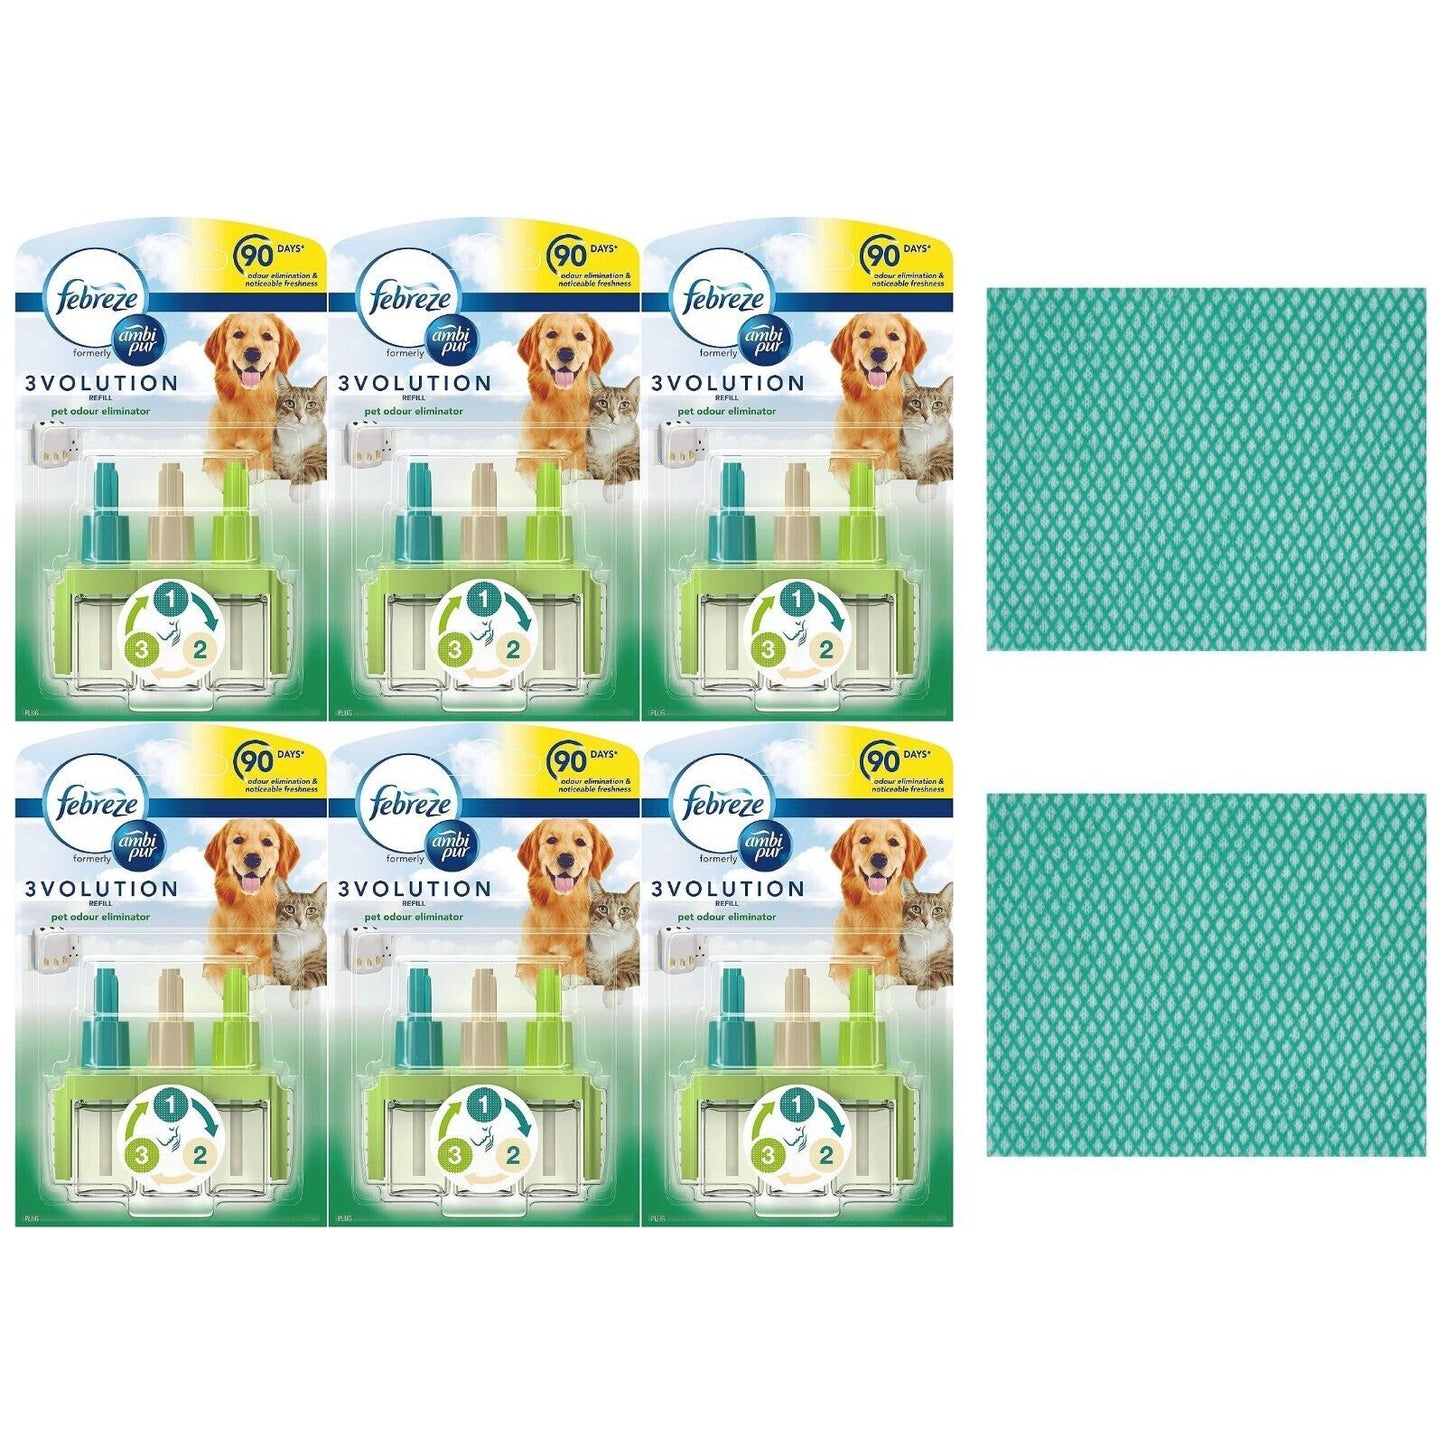 6 x Febreze 3Volution Plug-In Refill - Pet Odour Elimination+Cleaning Cloth